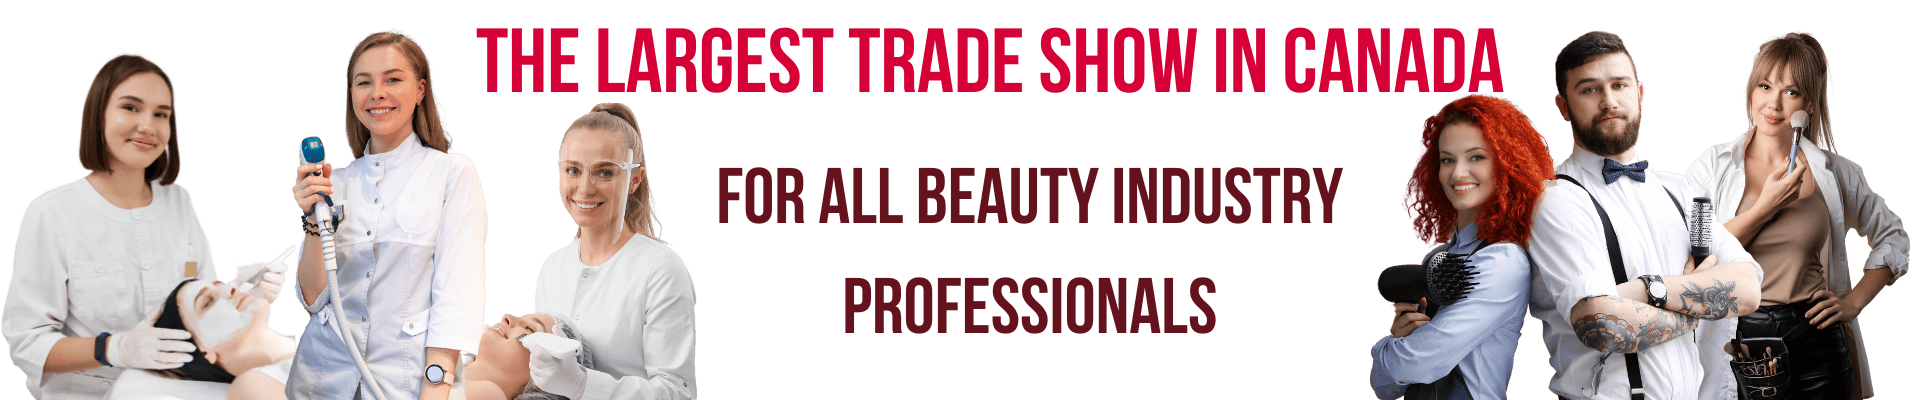 Esi Show The Largest Beauty Industry